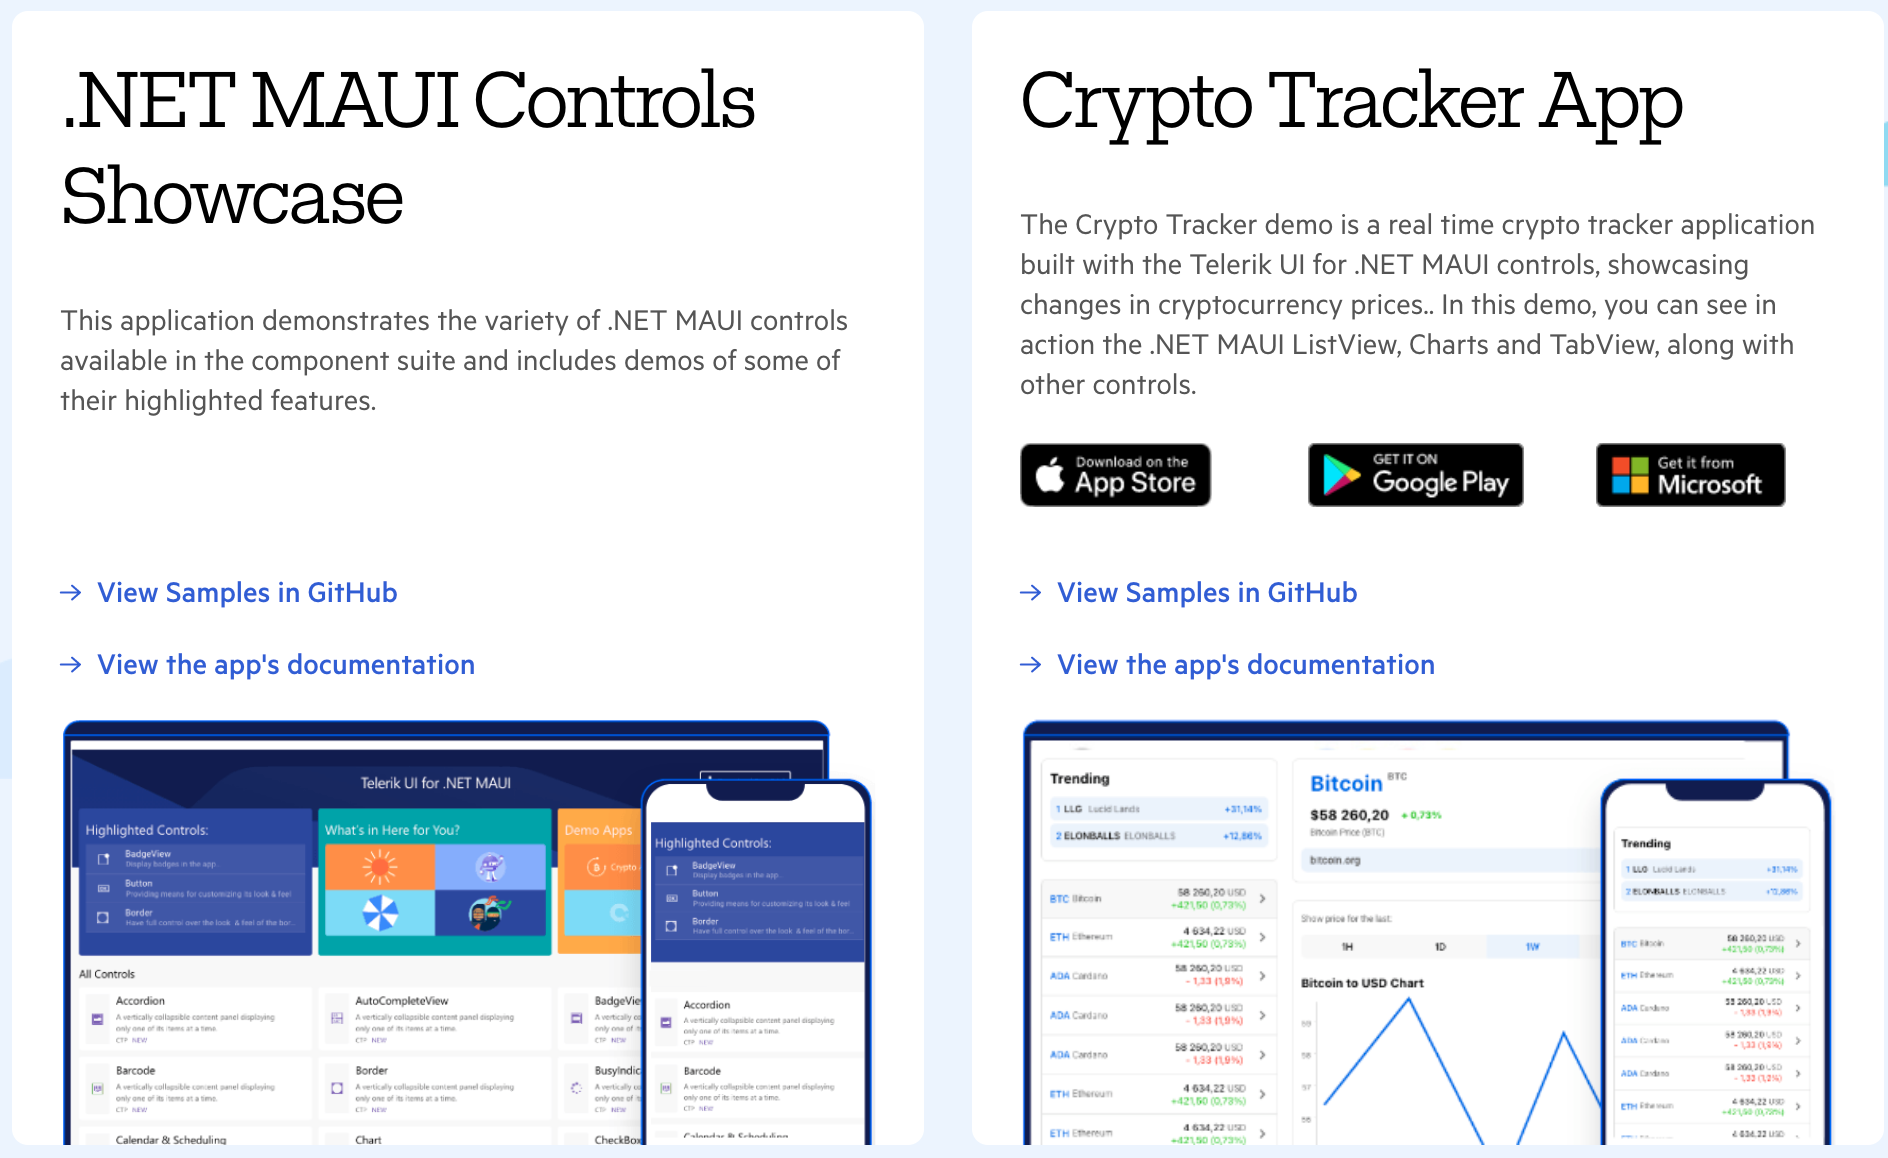 Controls Showcase and Crypto Tracker Apps